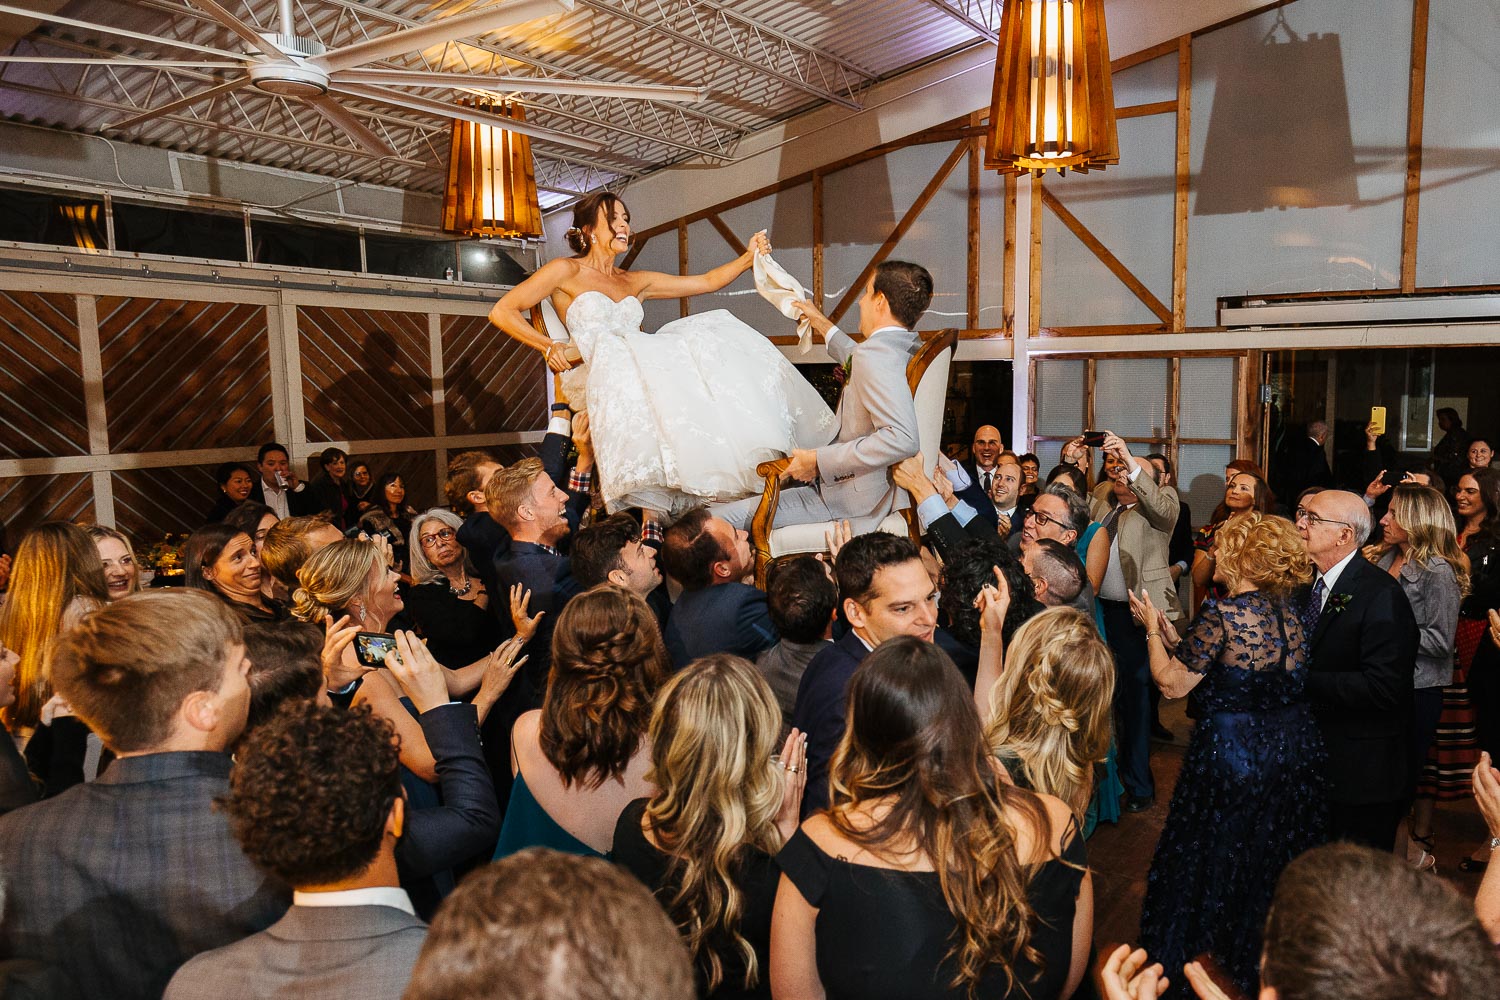 The Hora or chair dance as bride and groom are lifting high above all the wedding guests showing friends and family dancing around them at Barr Mansion Austin